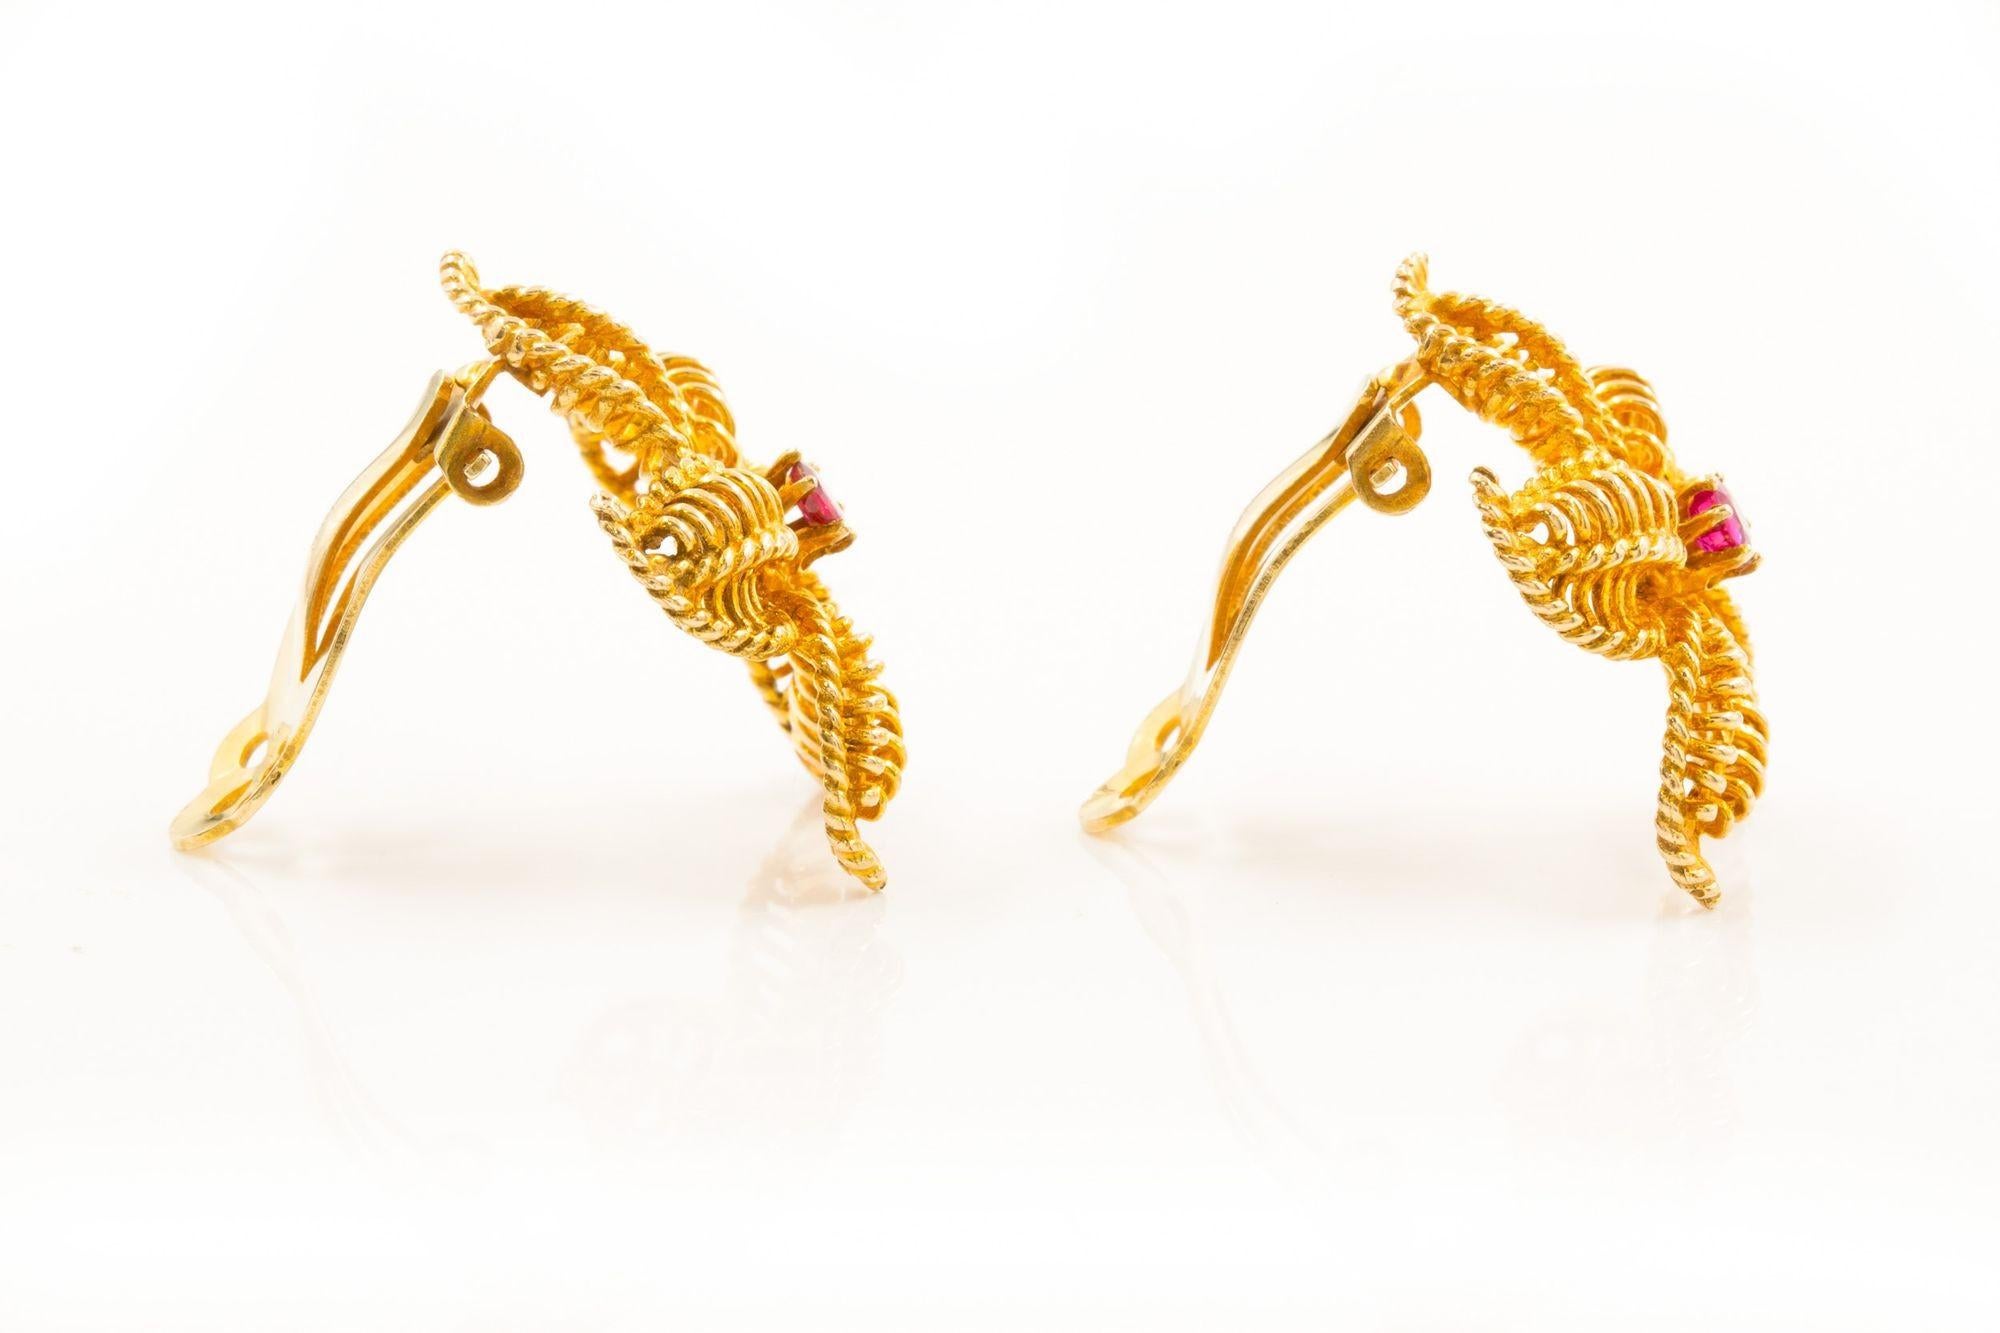 Pair of 14K Yellow Gold & Gemstone Starfish Earrings For Sale 2